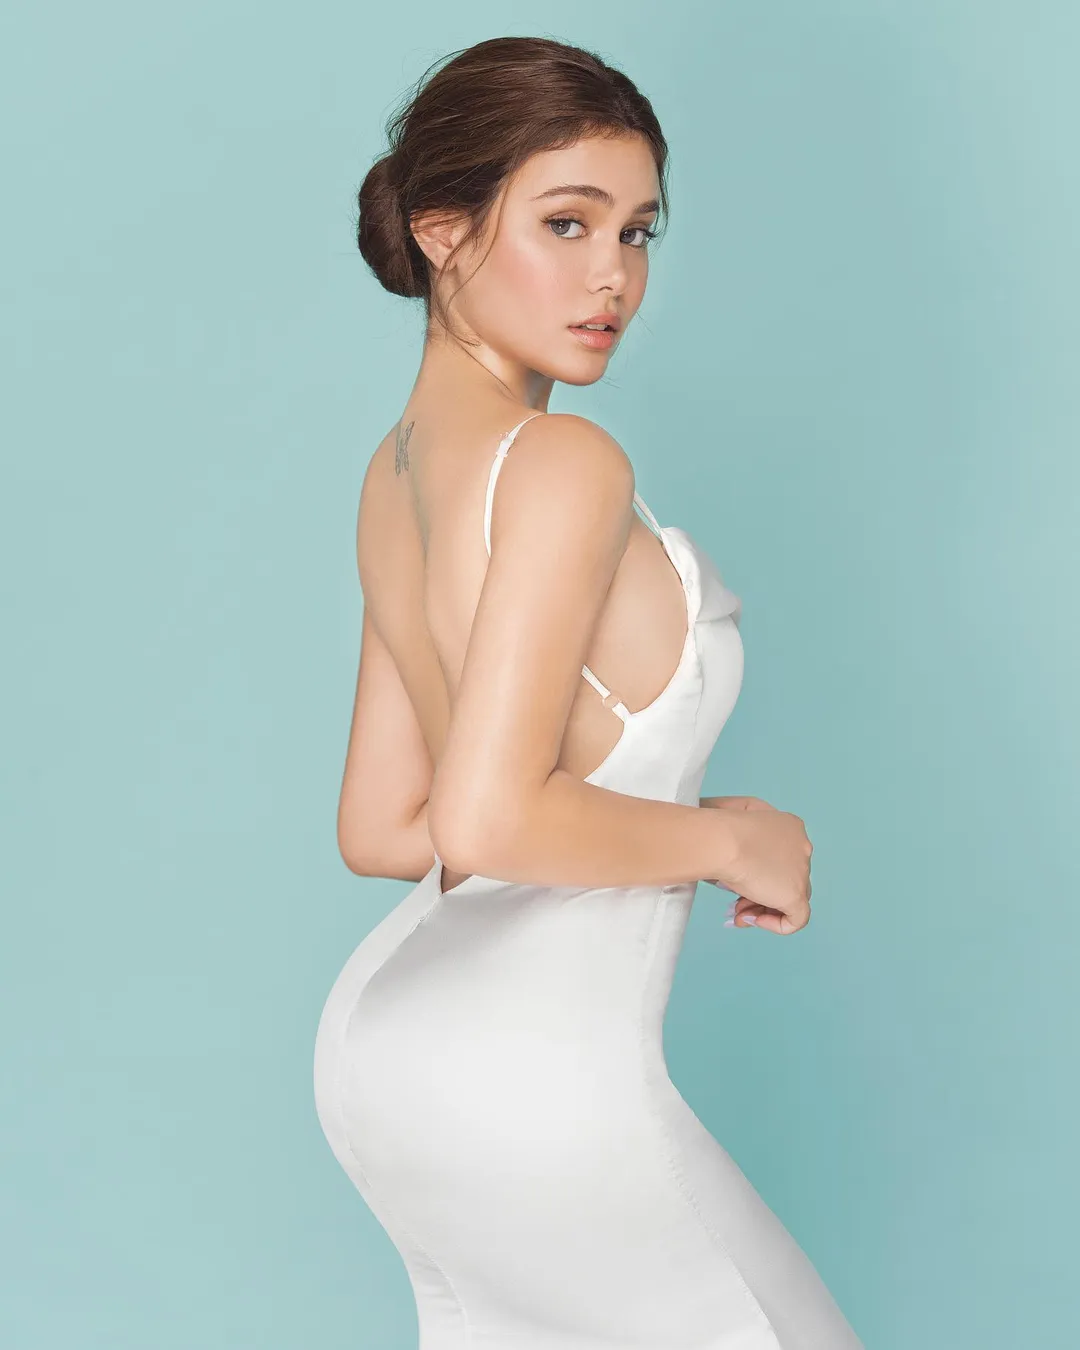 Ivana Alawi - Most Famous Filipino Instagram Models - Hottie Philippines Female Social Influencer to Follow